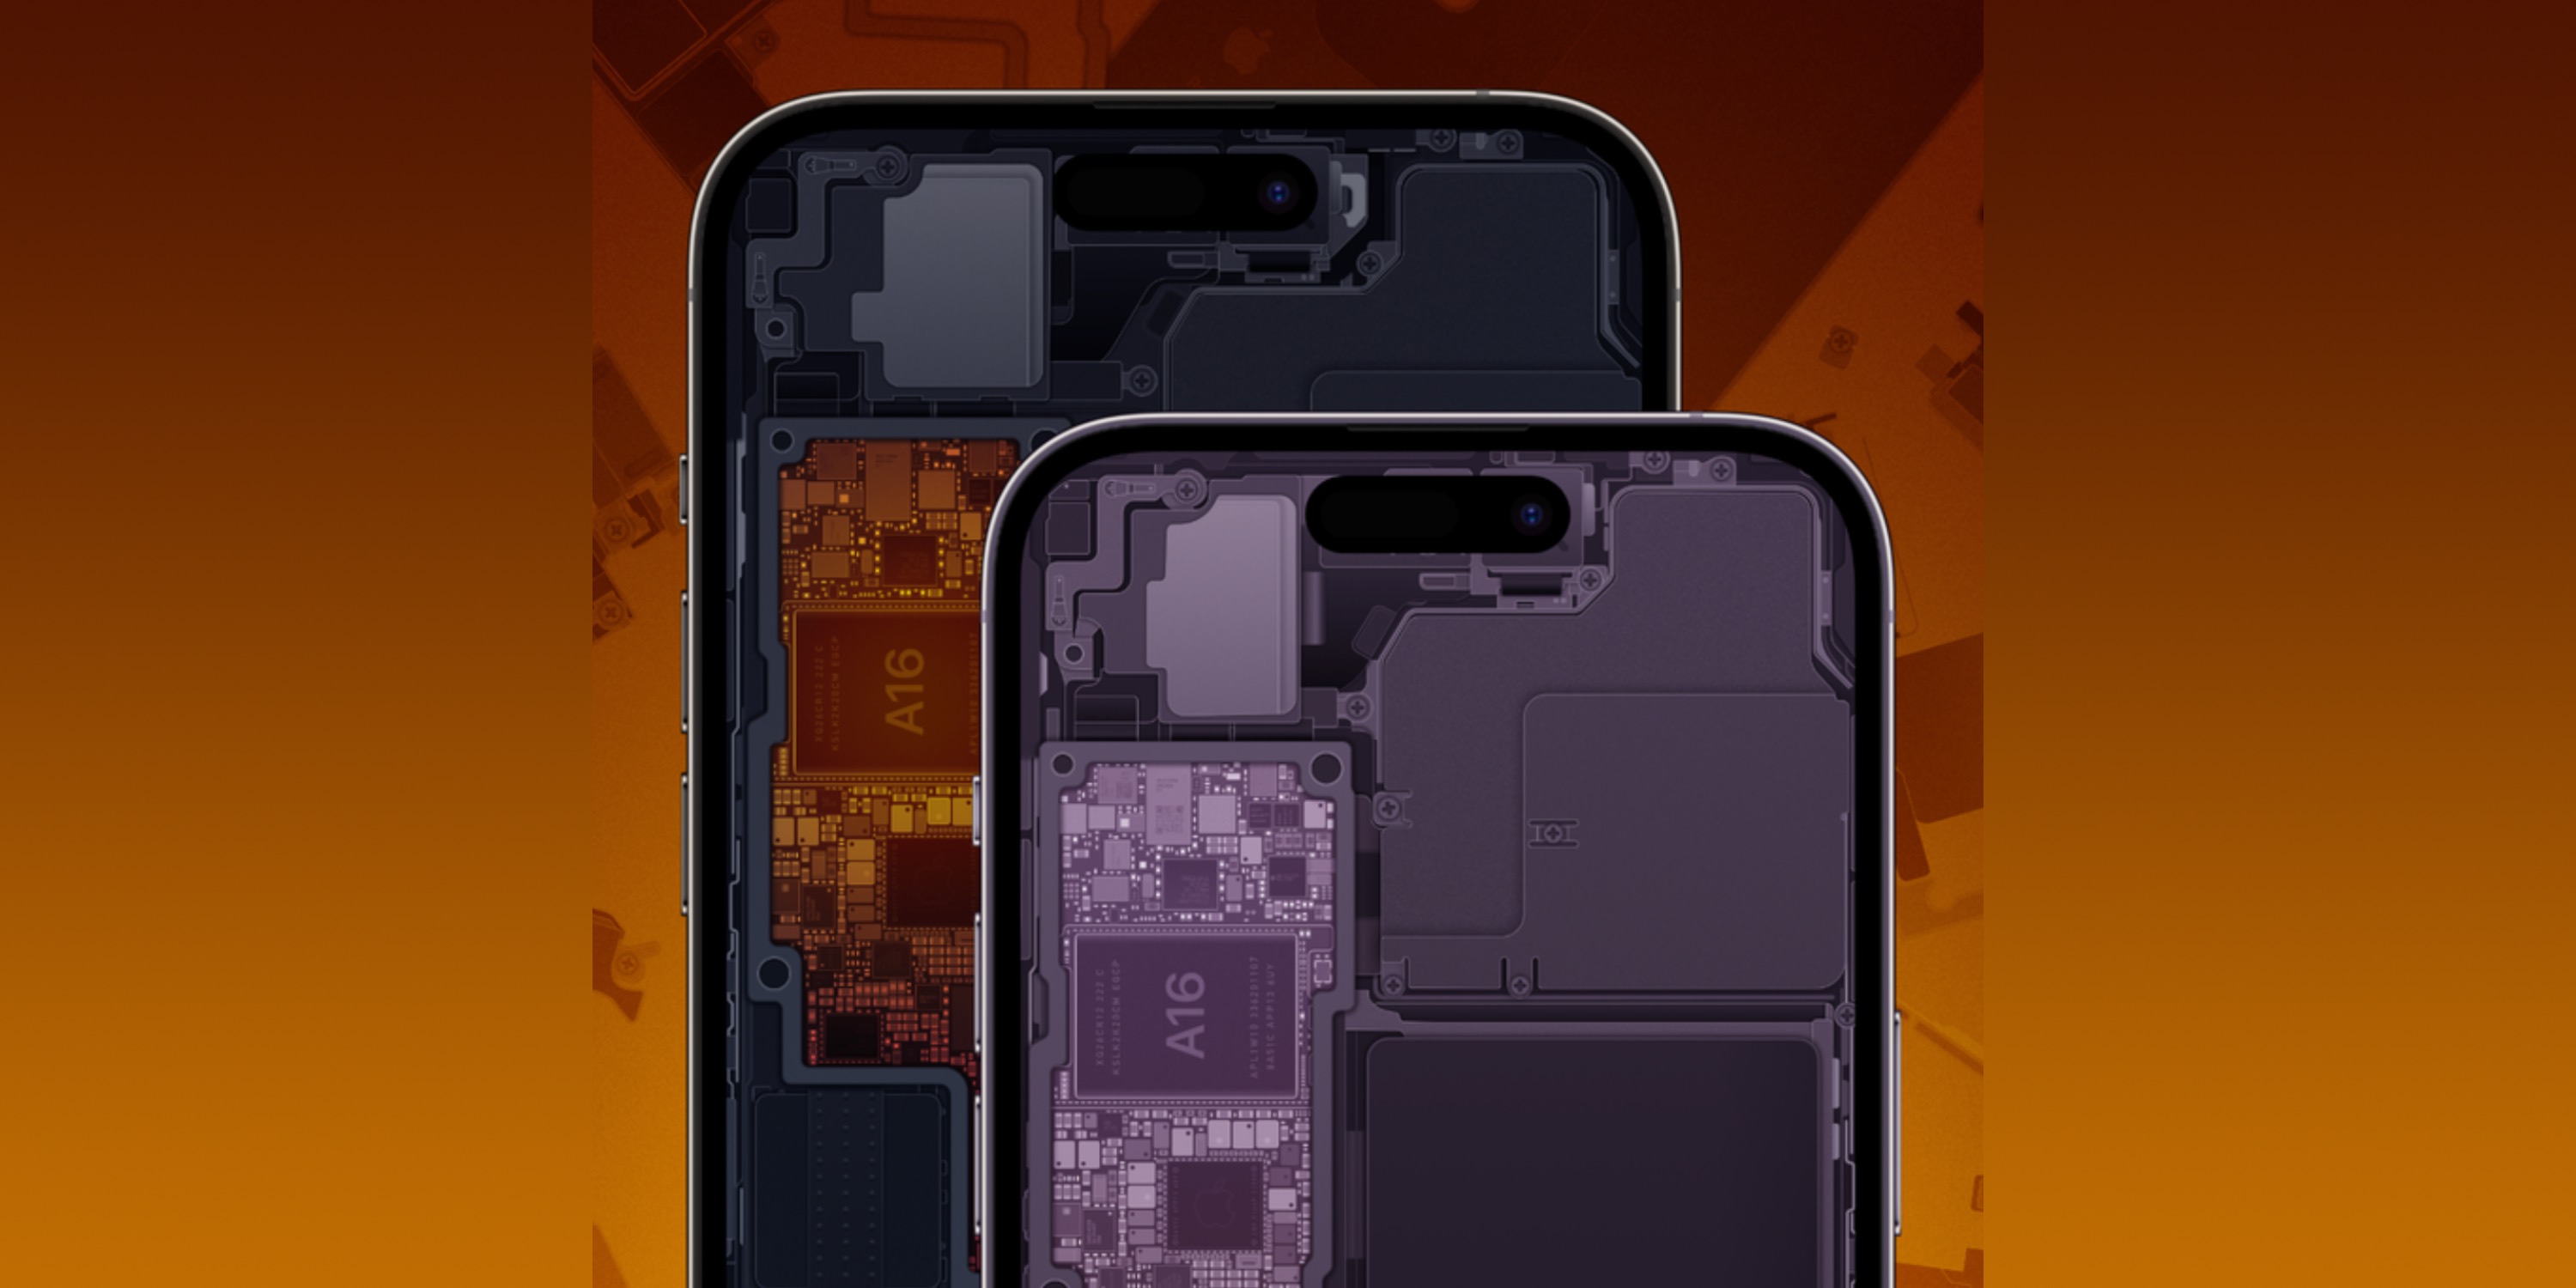 Peek inside your new iPhone 12 mini and iPhone 12 Pro Max with iFixits  Xray wallpapers  9to5Mac